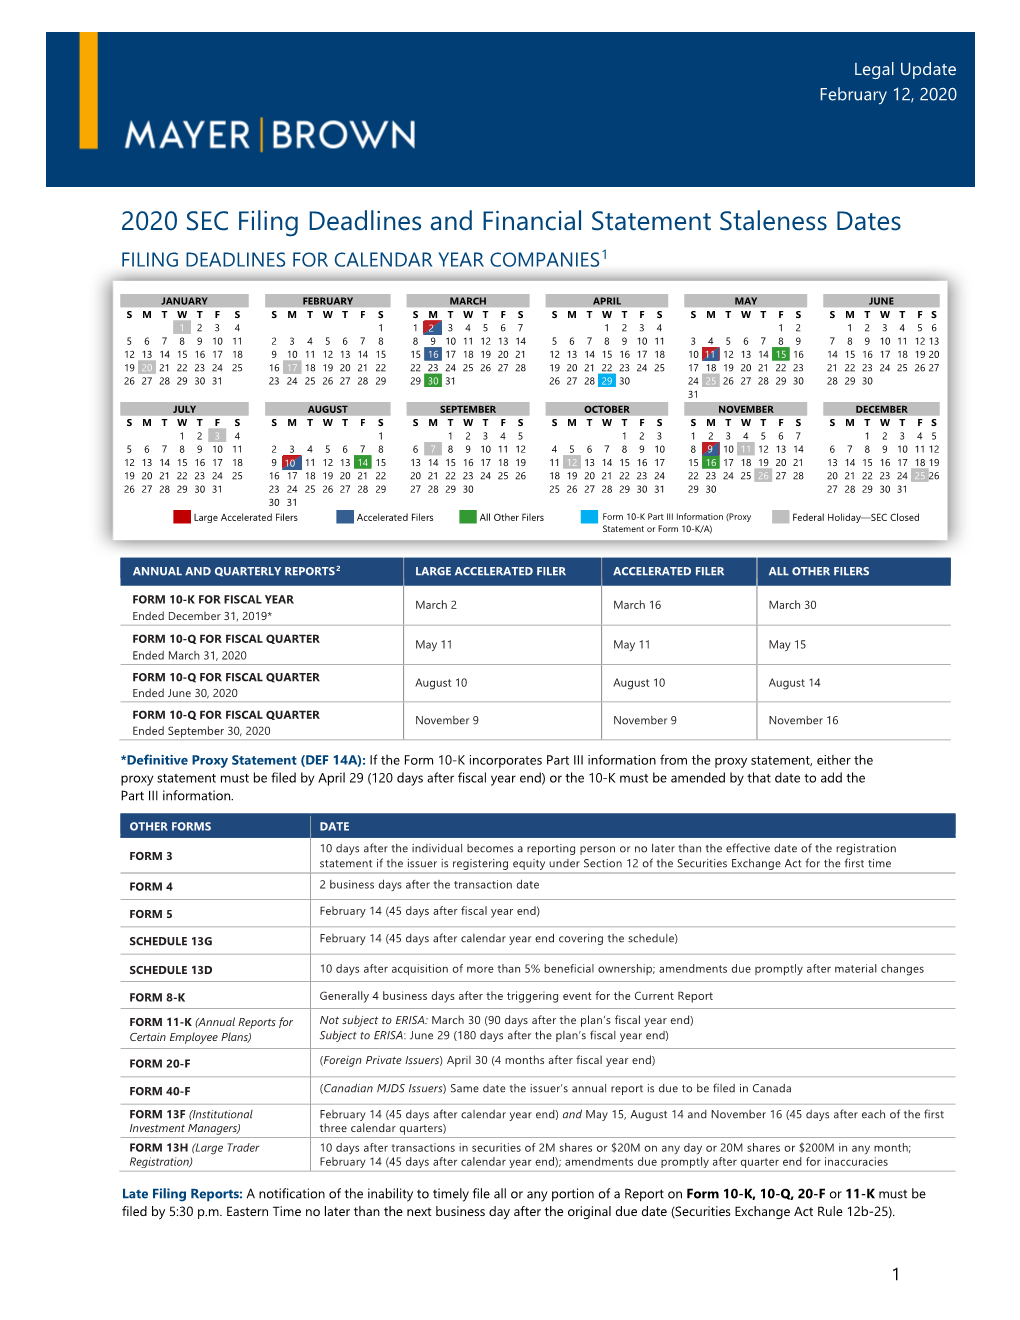 2020 SEC Filing Deadlines and Financial Statement Staleness Dates FILING DEADLINES for CALENDAR YEAR COMPANIES1